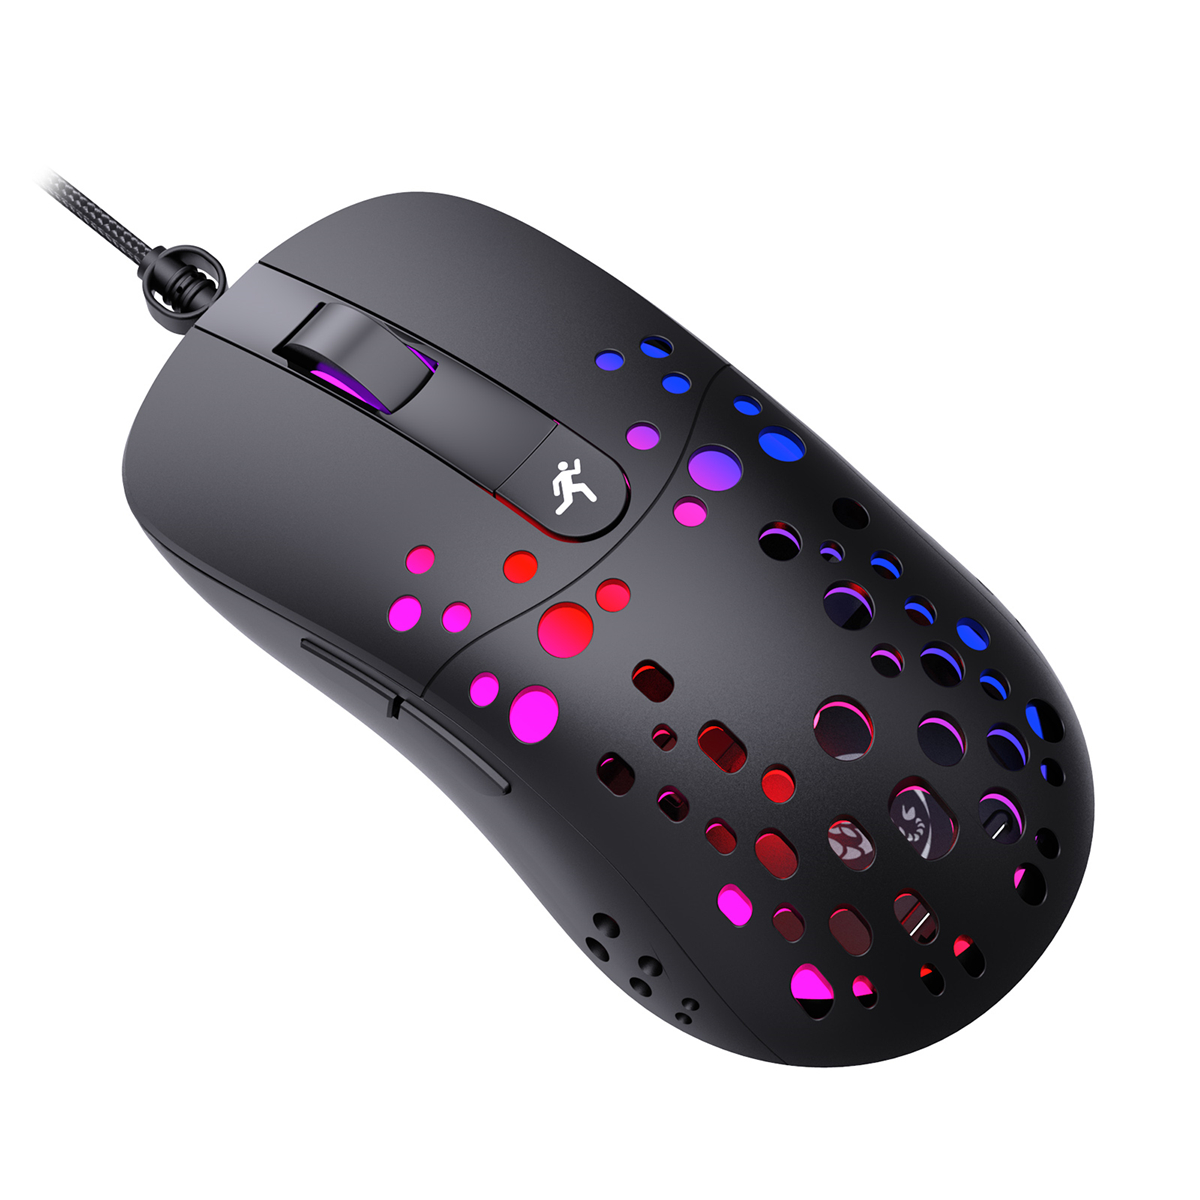 HXSJ A904 Wired Gaming Mouse Honeycomb Hollow 8000DPI A199 Chip Ergonomic RGB Backlit Gaming Mouse for Desktop Computer Laptop PC